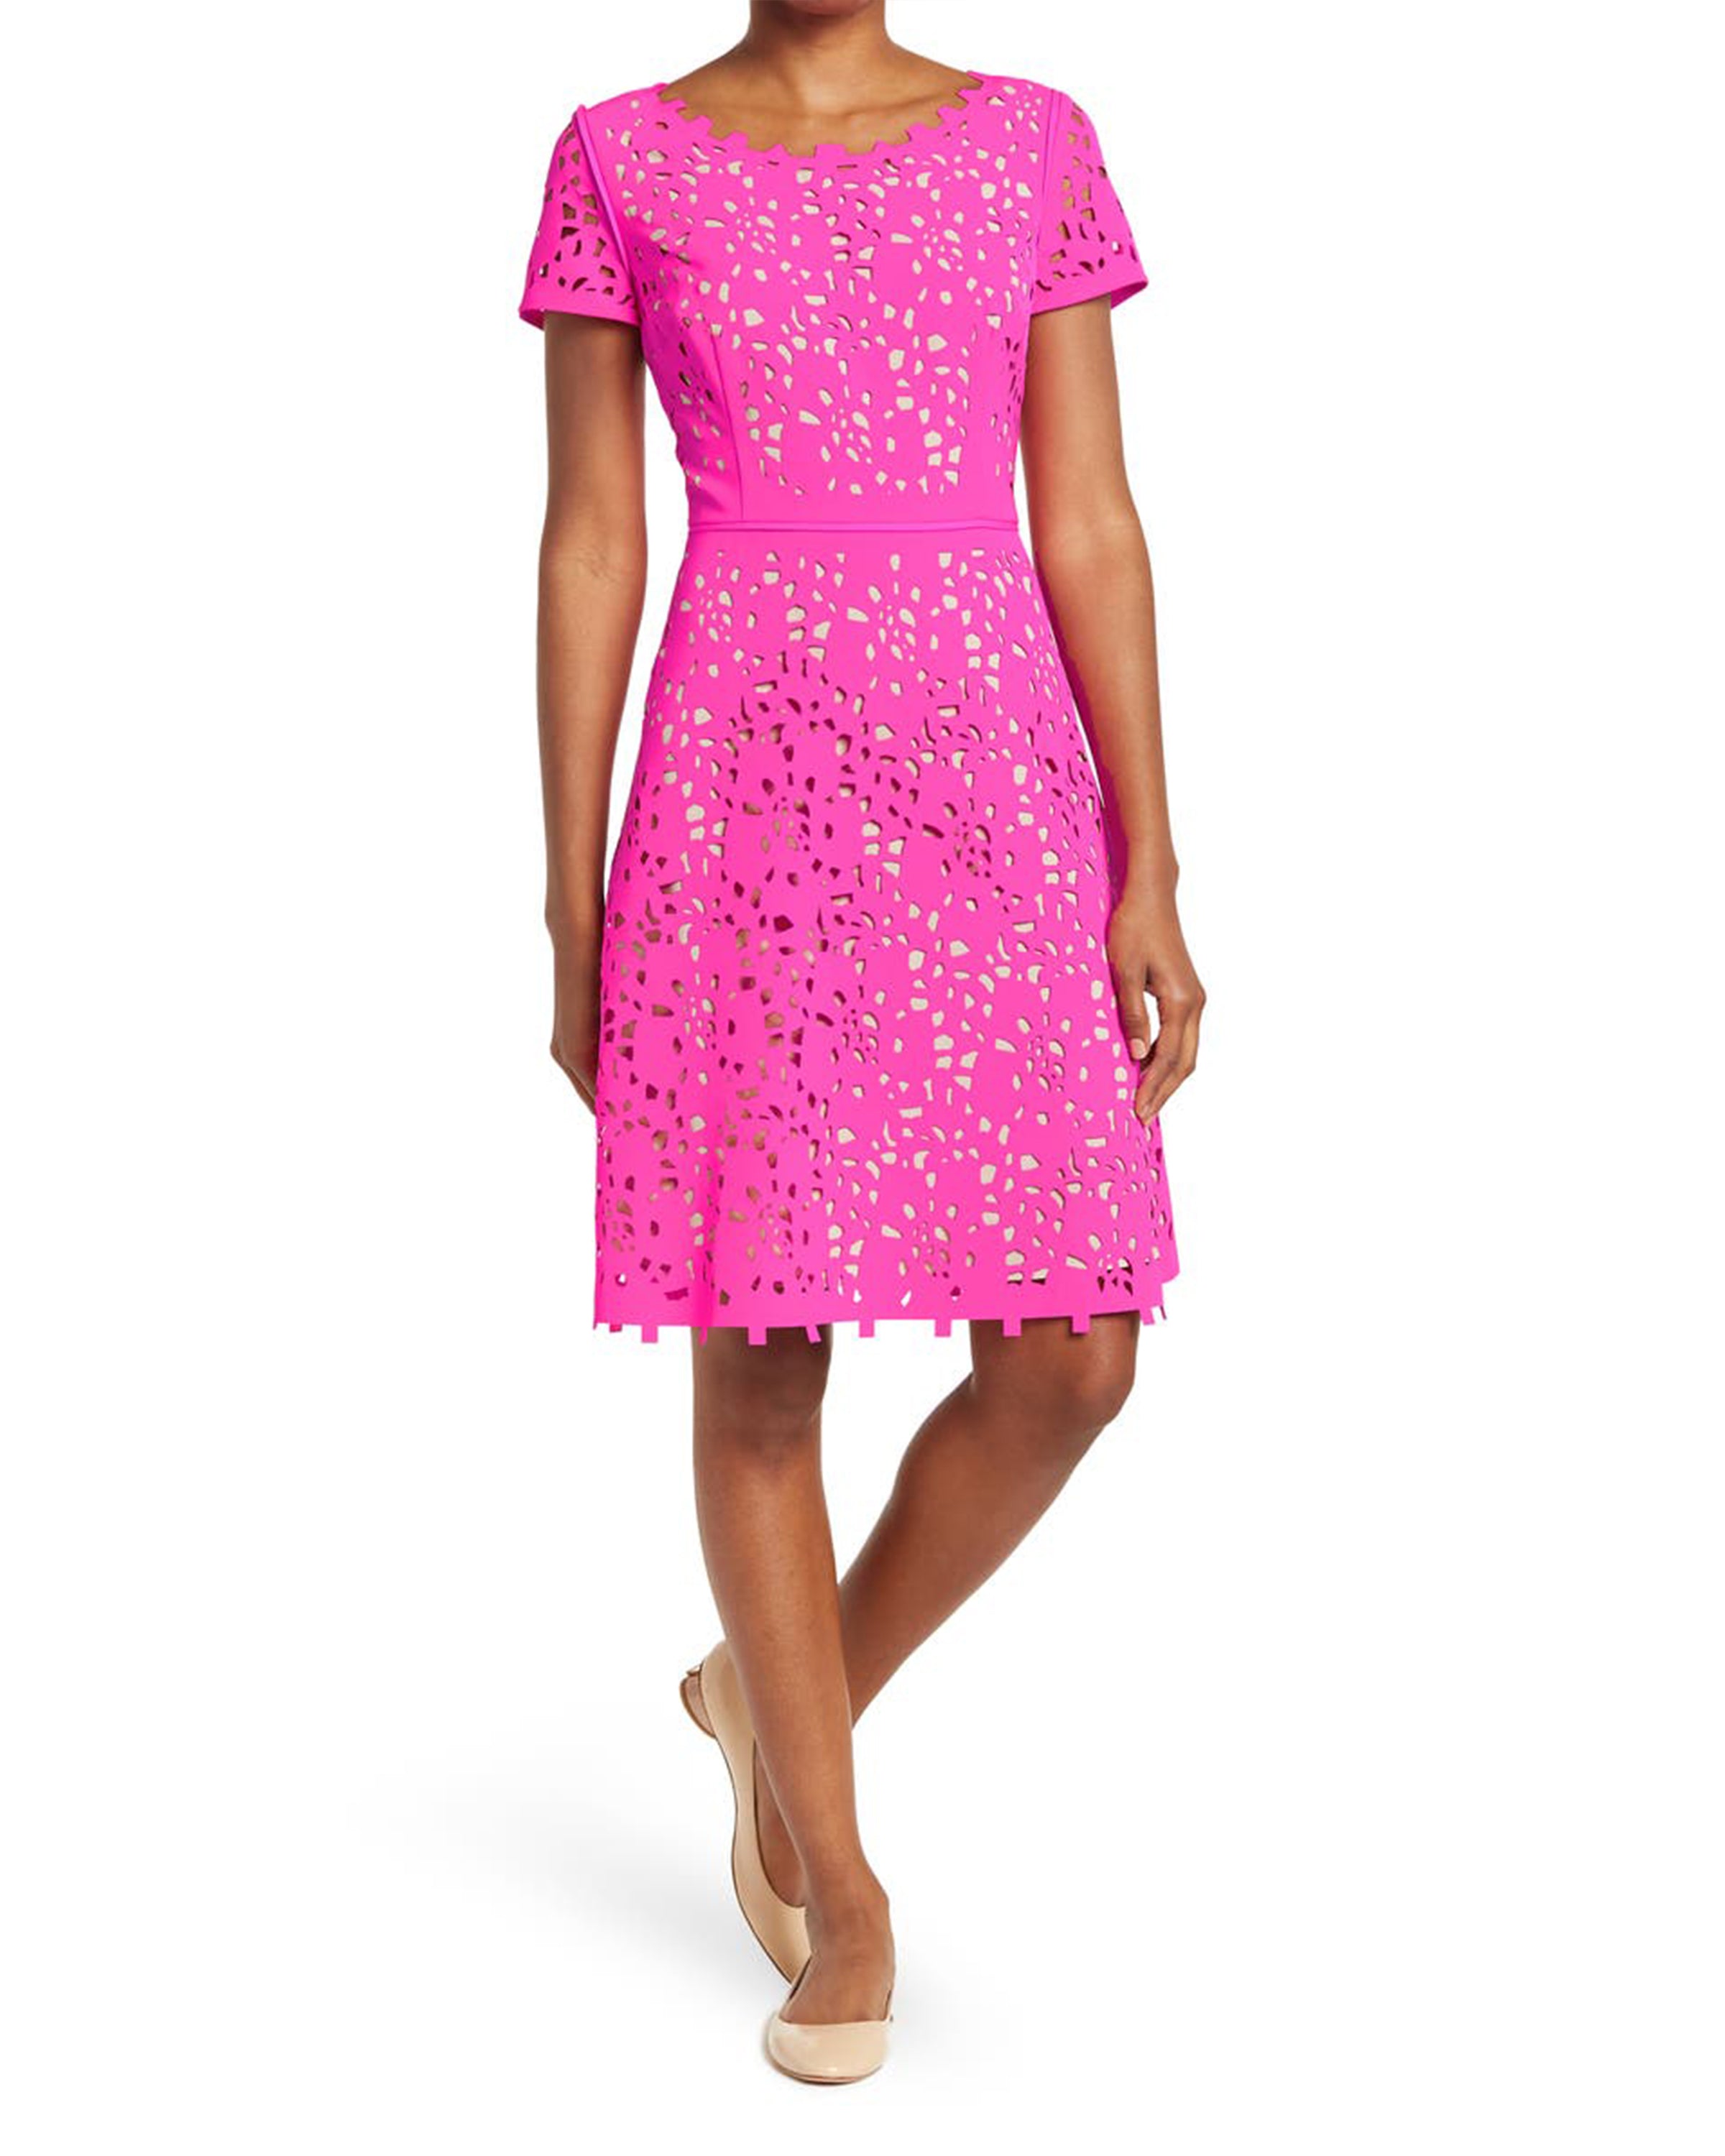 FOCUS by Shani - Laser Cut Fit and Flare Dress - HOT PINK